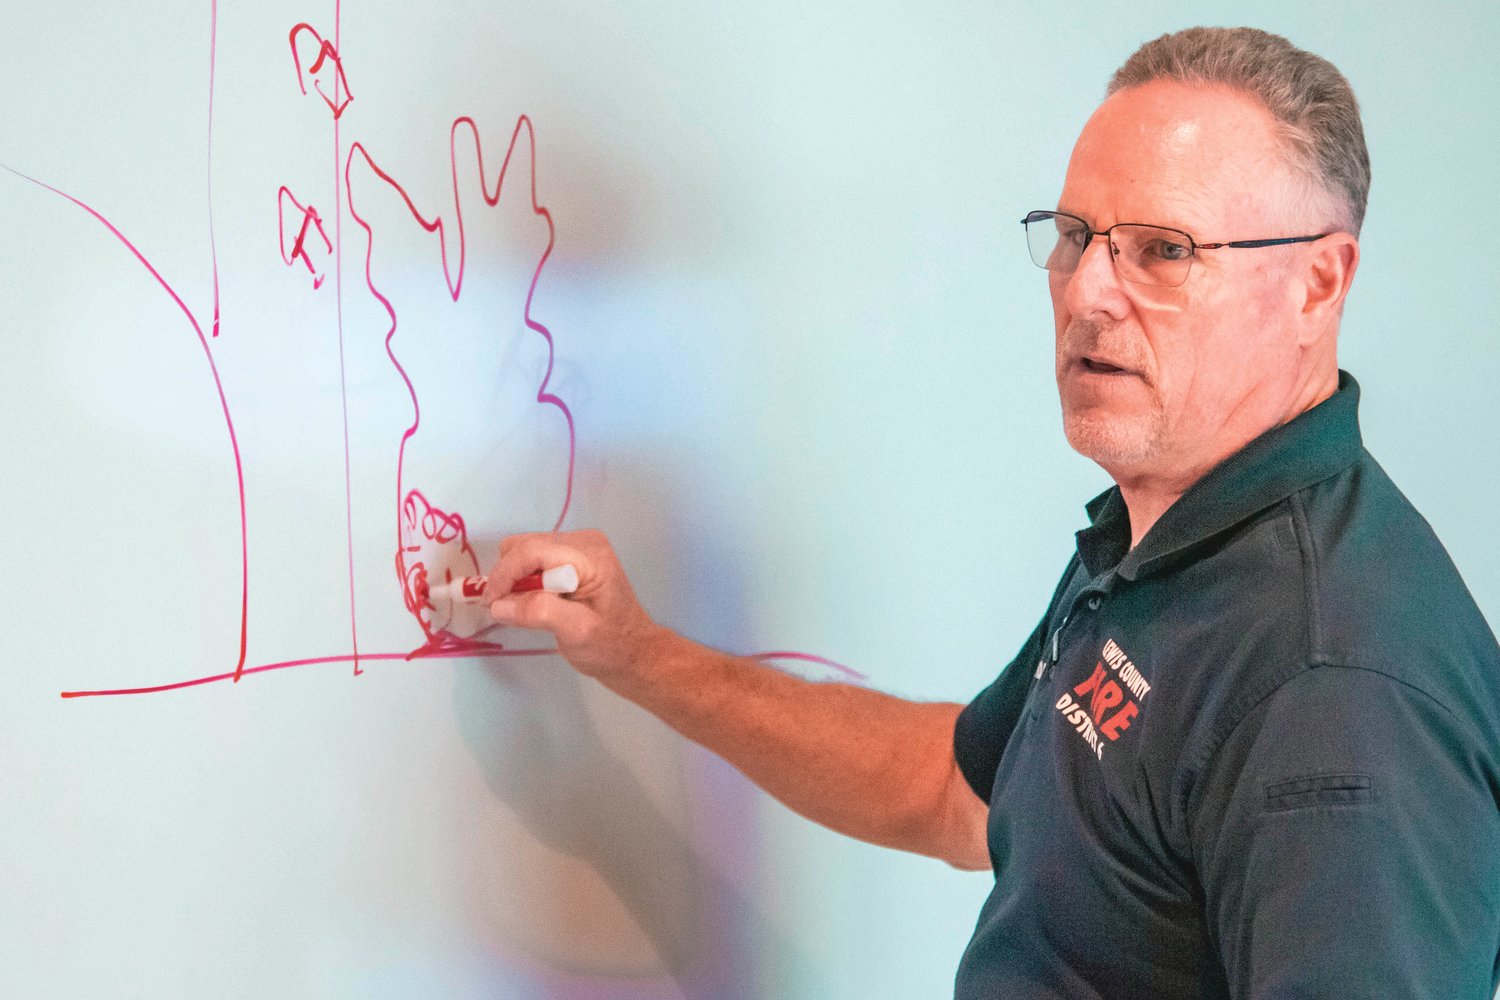 Lewis County Fire District 6 Chief Ken Cardinale draws a diagram on a whiteboard while talking about how firefighters respond to calls on Thursday.